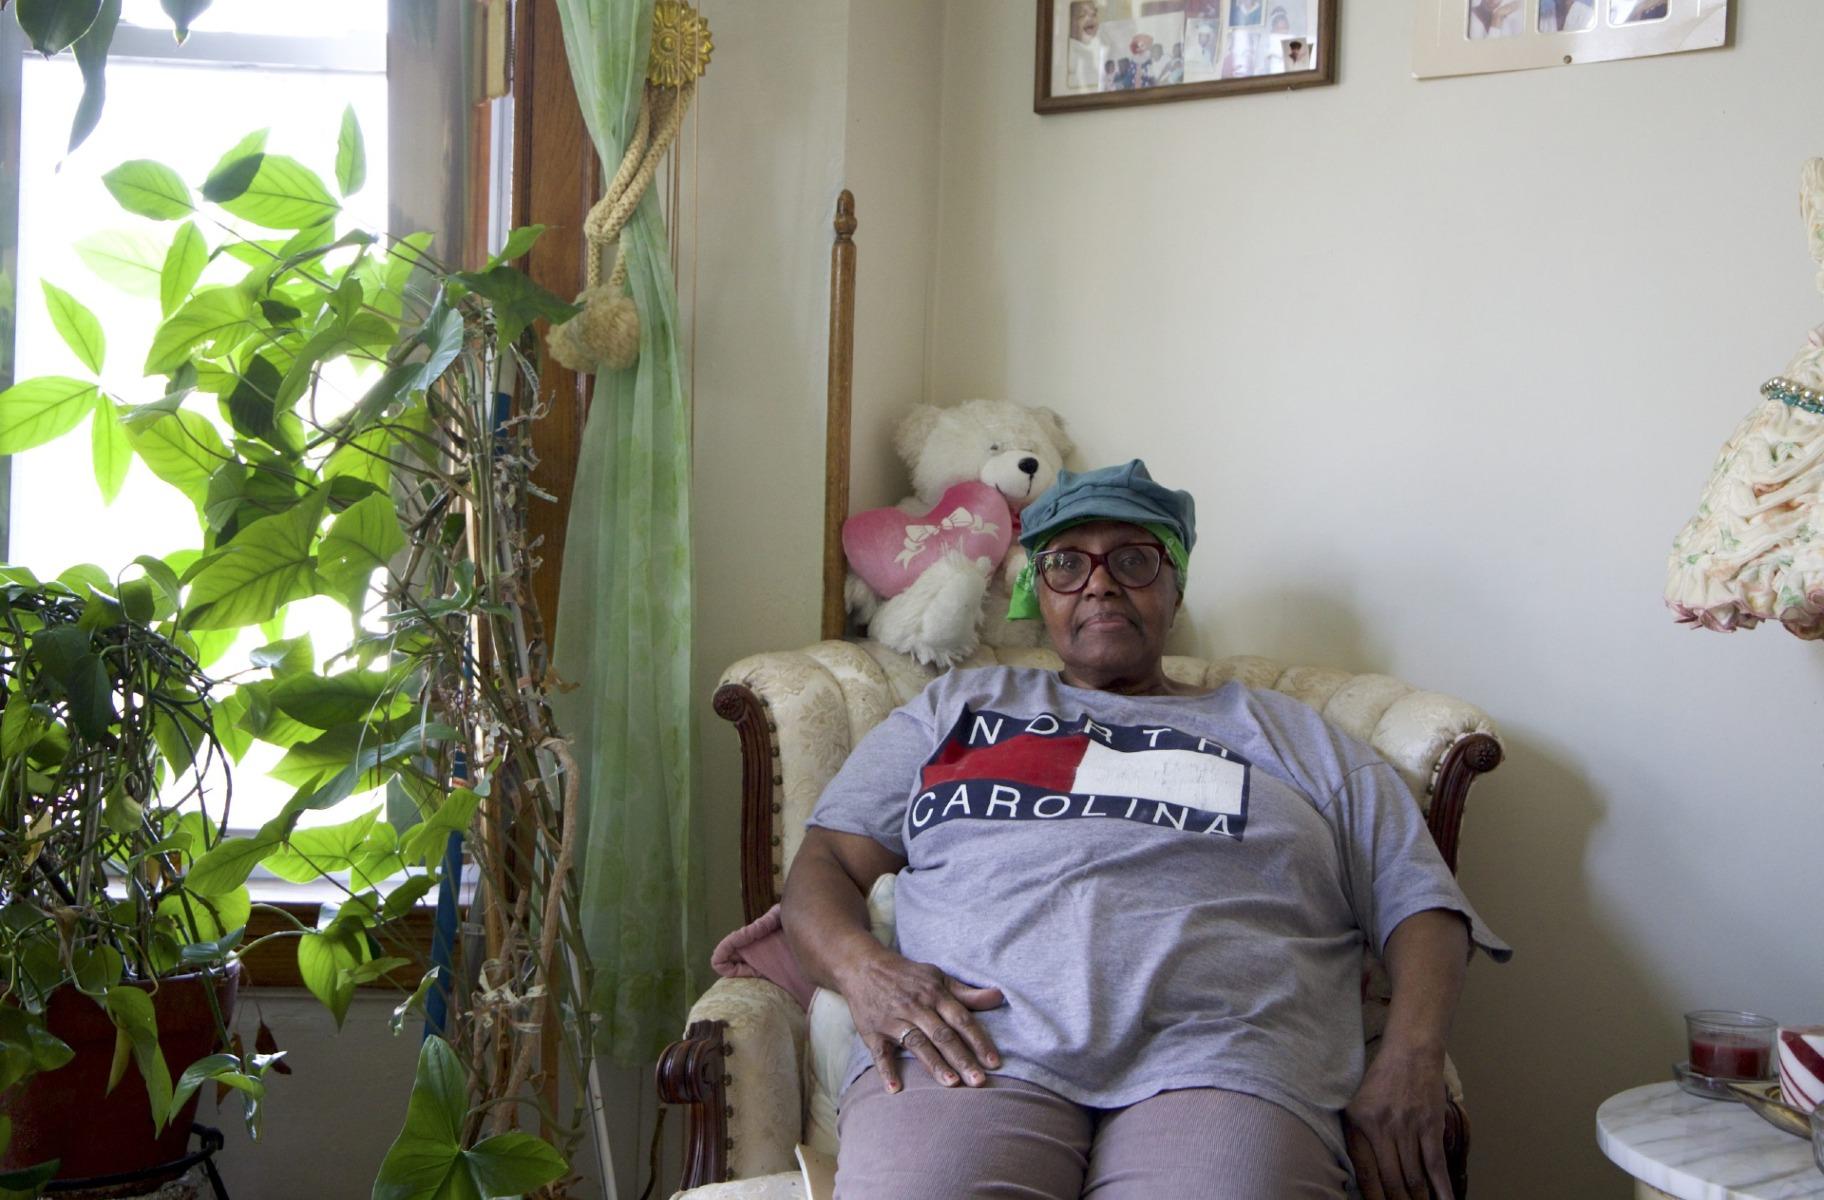 Queen Jackson, 83, has lived in her West Garfield Park home for six decades. She said she invested money into flood control efforts -- and she still faced significant flood damage from the storm last July. (Meredith Newman / Illinois Answers Project)